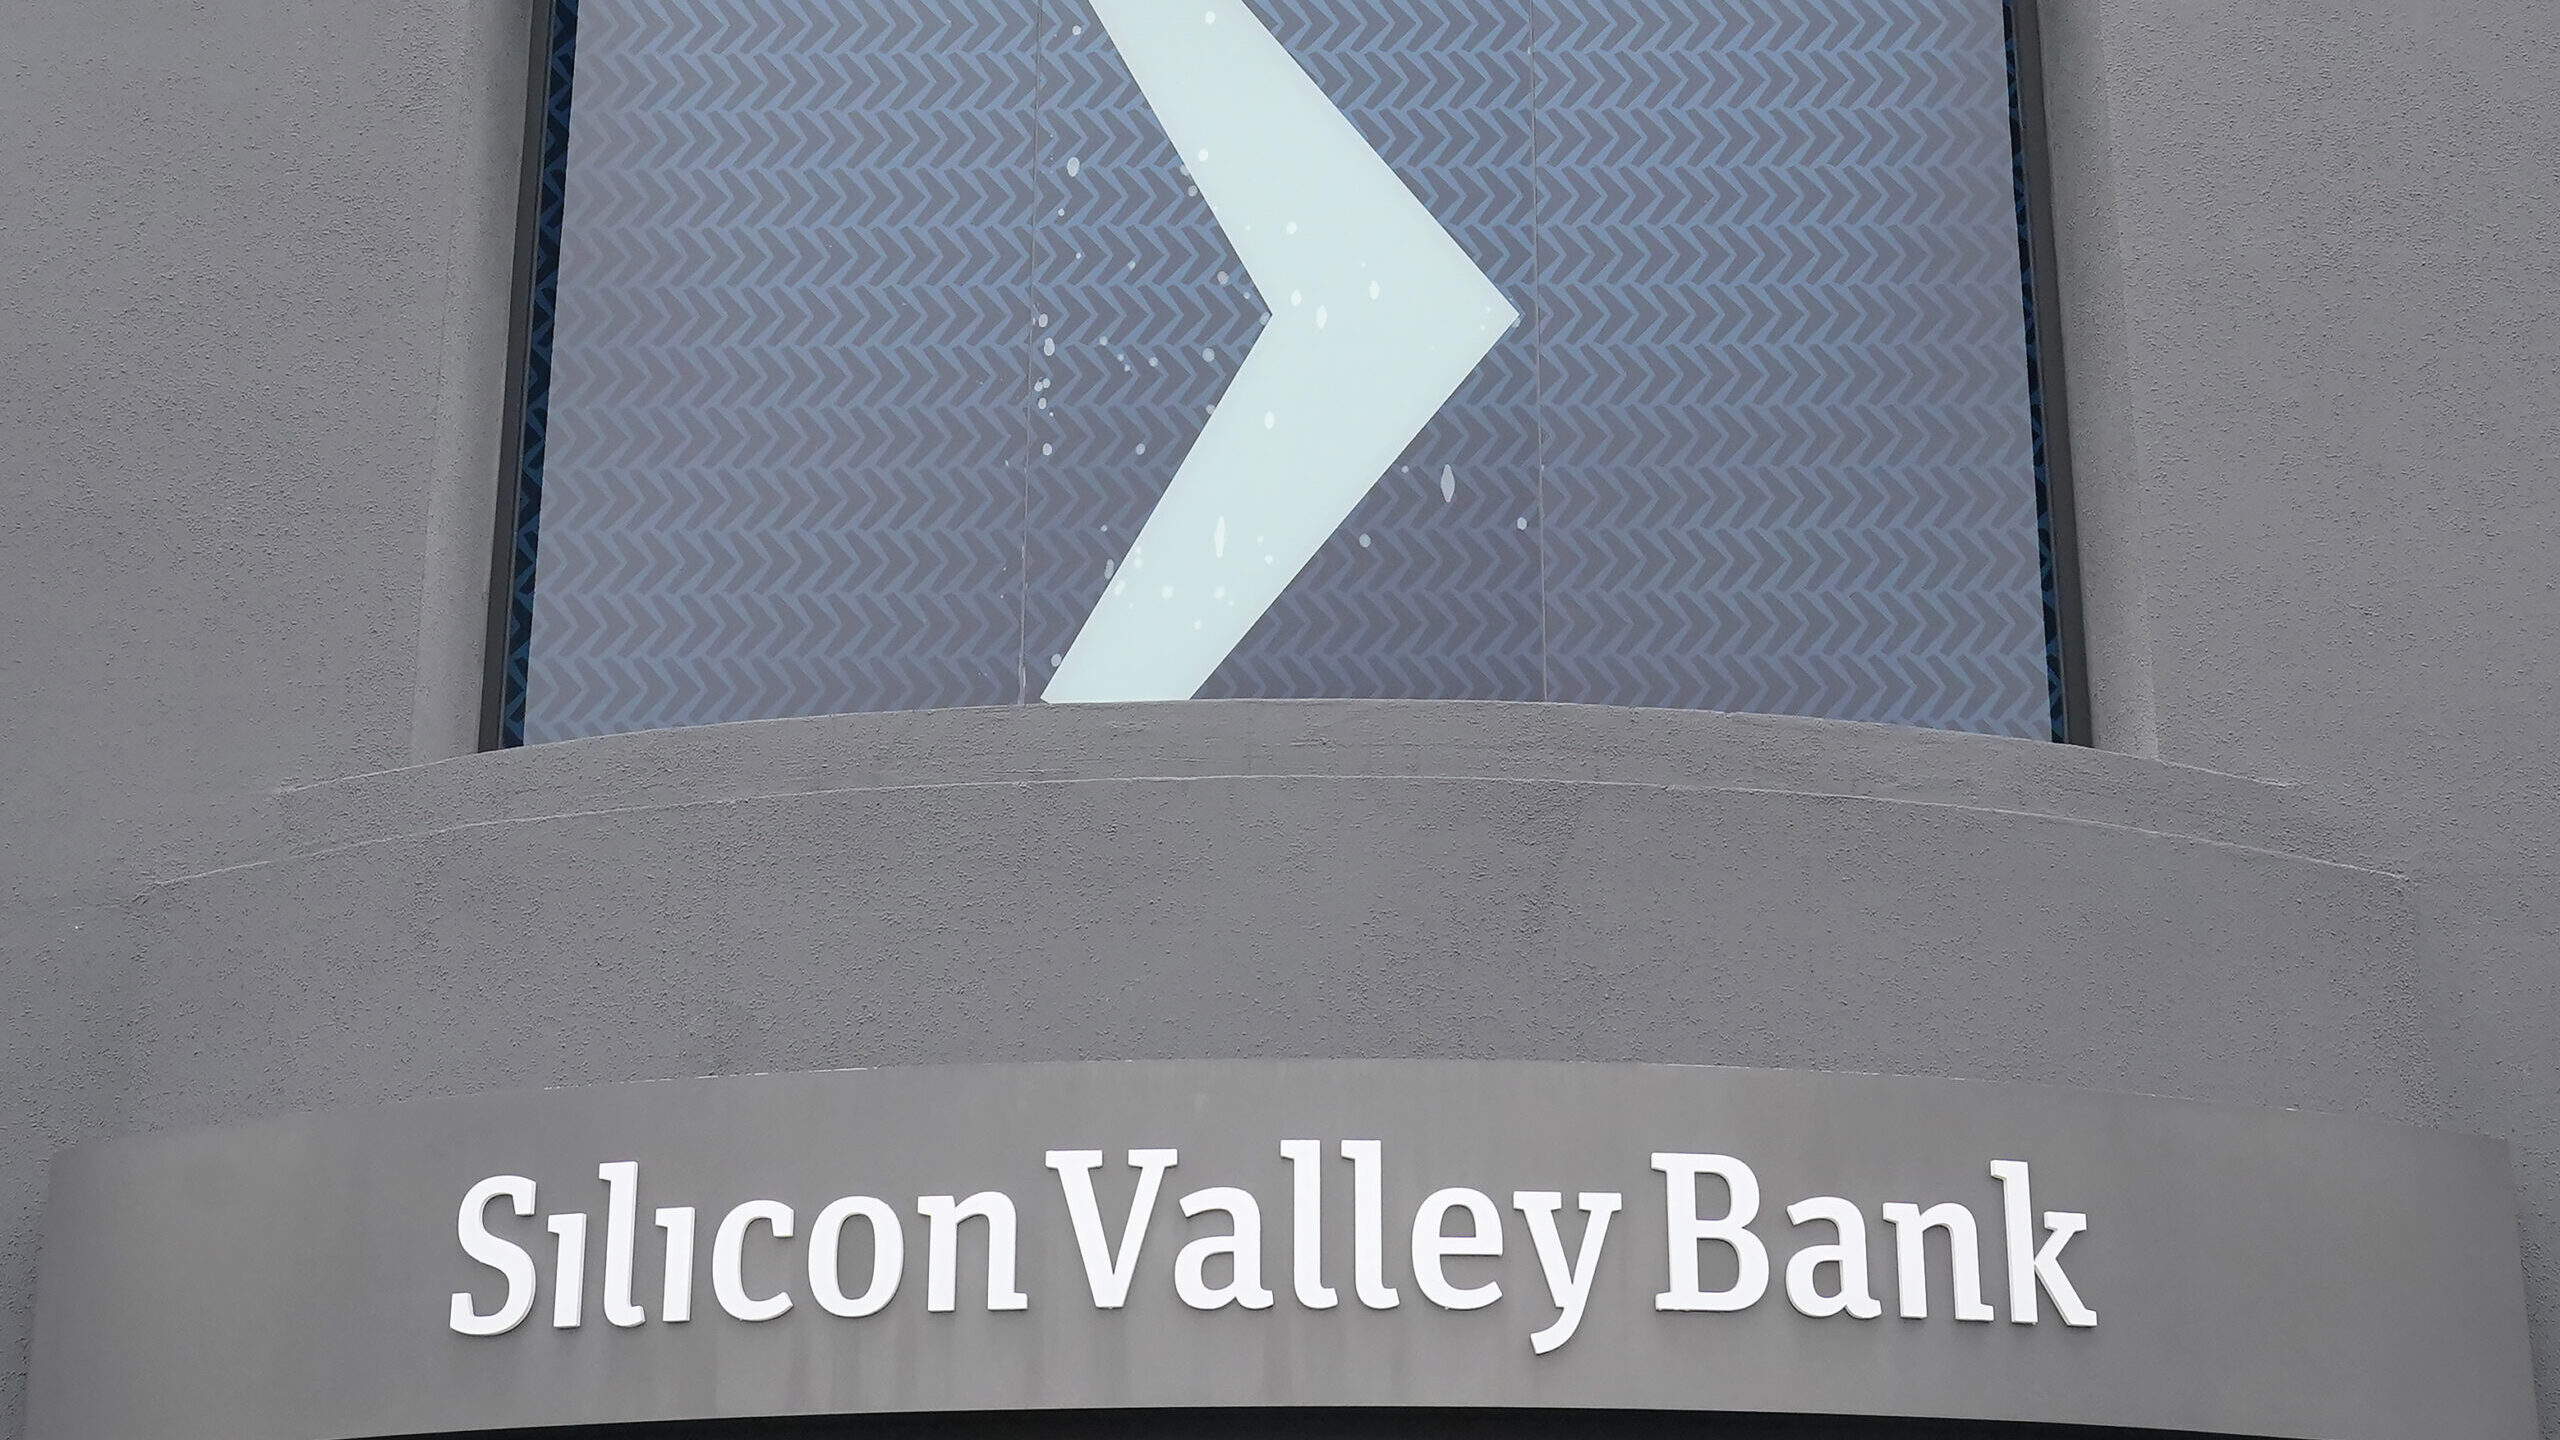 A Silicon Valley Bank sign is shown at the company's headquarters in Santa Clara, Calif., Friday, M...